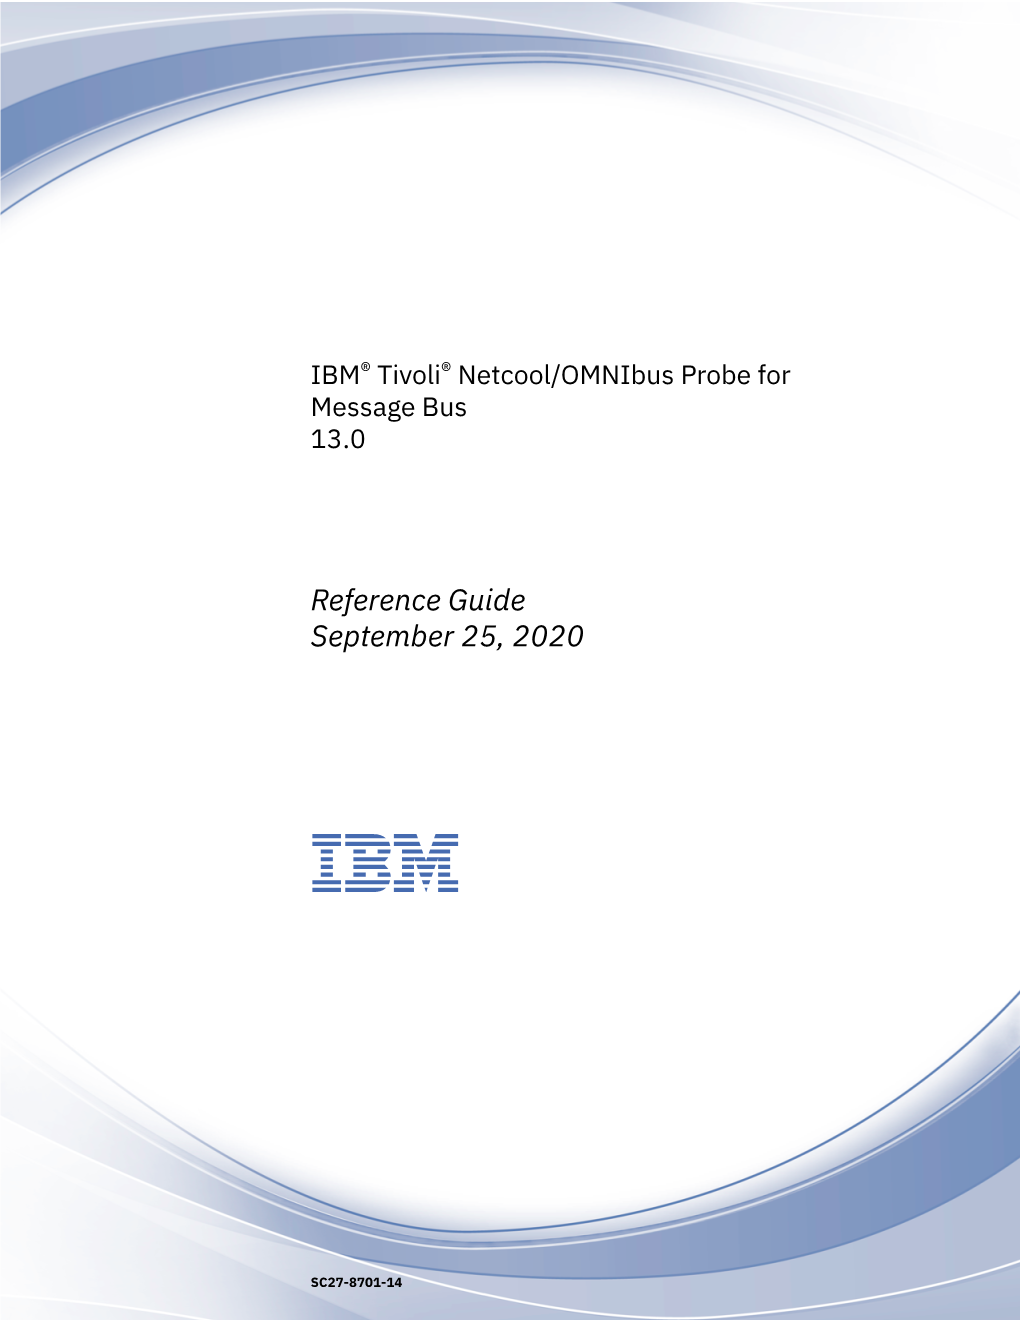 IBM Tivoli Netcool/Omnibus Probe for Message Bus: Reference Guide Table 1